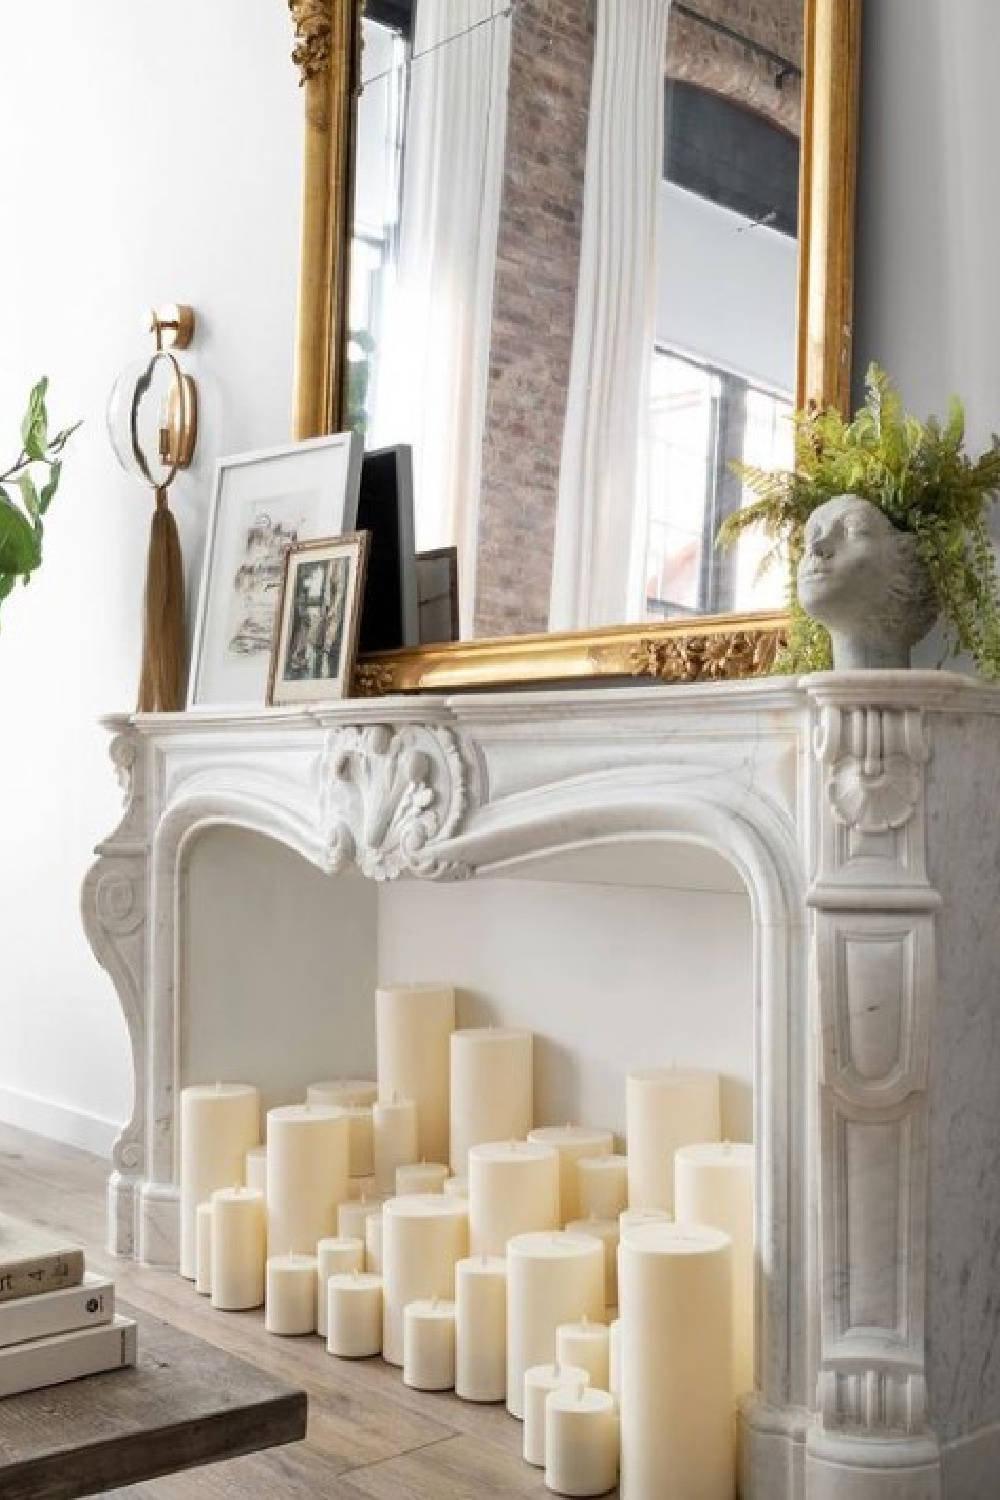 French fireplace surround with candles in beautiful Alison Victoria designed Atlanta loft on HTV's Windy City Rehab. Photo: Rustic White Interiors; Styling: Courtney Favini. House Beautiful.